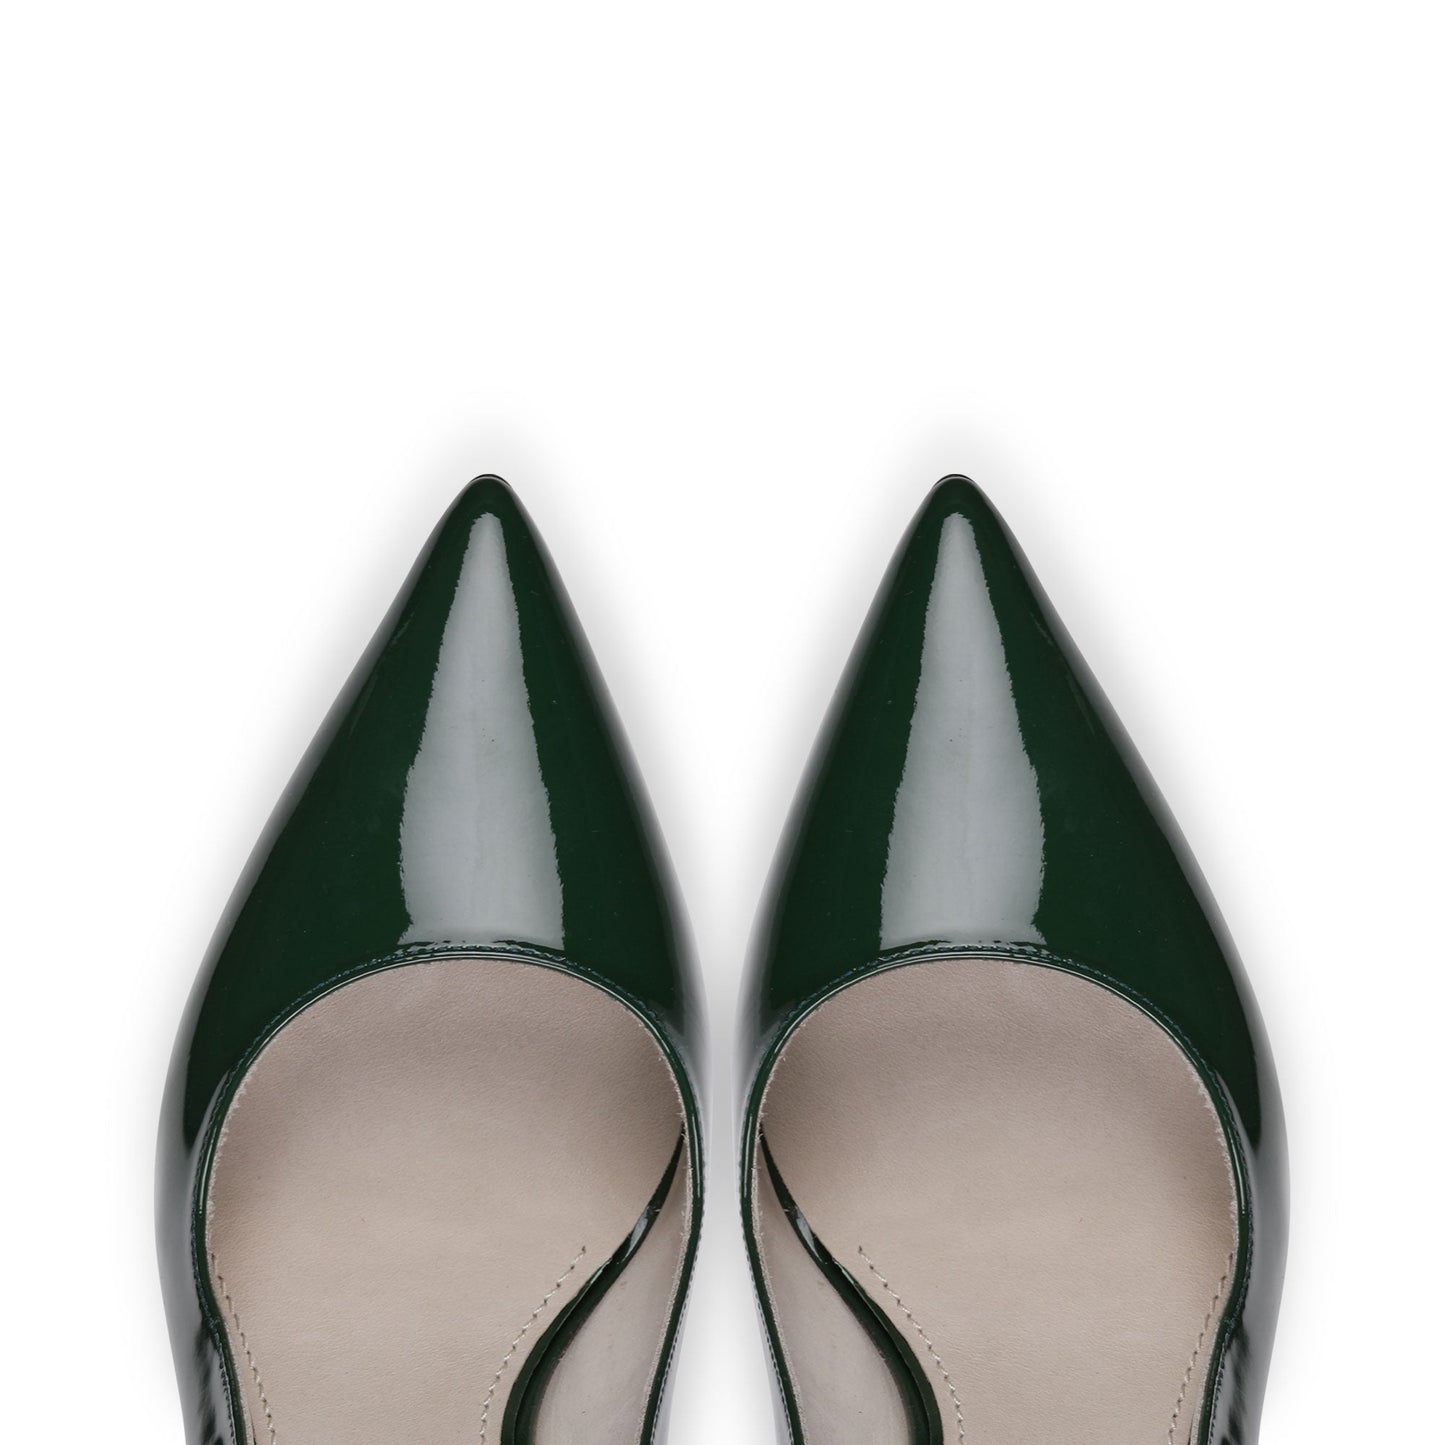 Green lacquered pumps